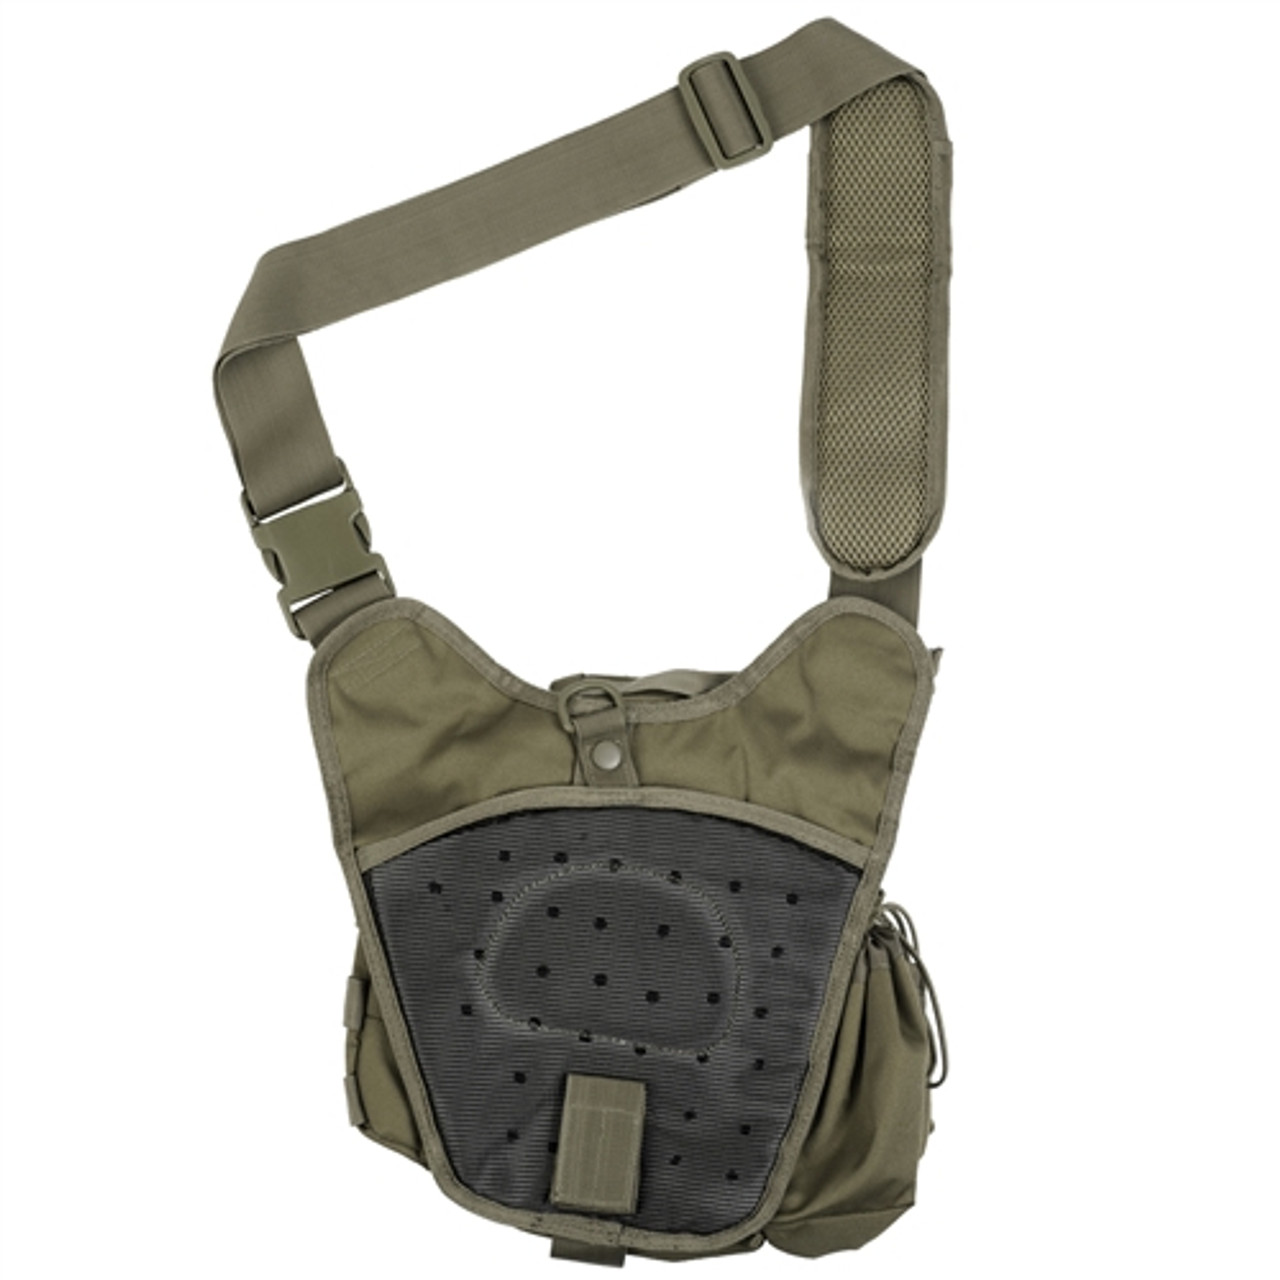 Olive Drab Hipster CCW Sling Pack By Red Rock | Military Luggage